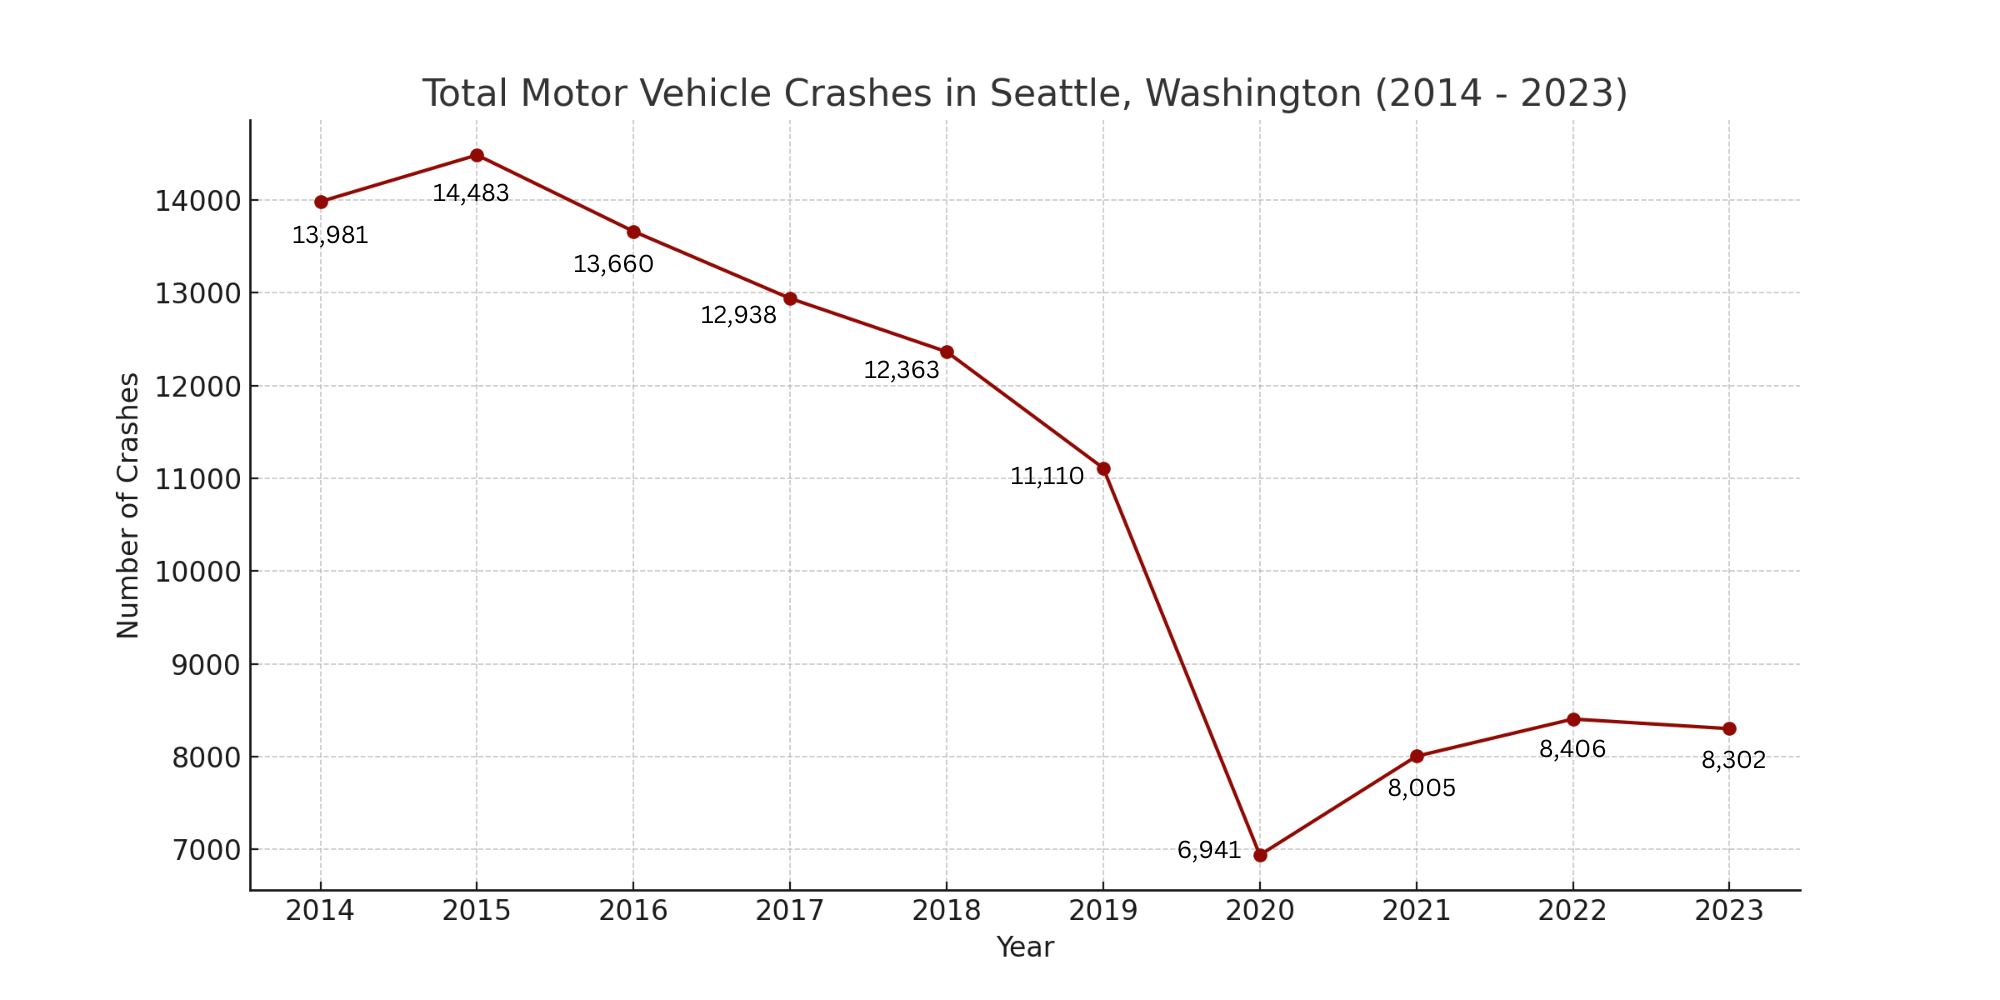 Line graph illustrating the total number of motor vehicle crashes in Seattle, Washington from 2014 to 2023. The data shows a decrease in crashes over time, with a notable dip in 2020 and a slight increase in the following years.